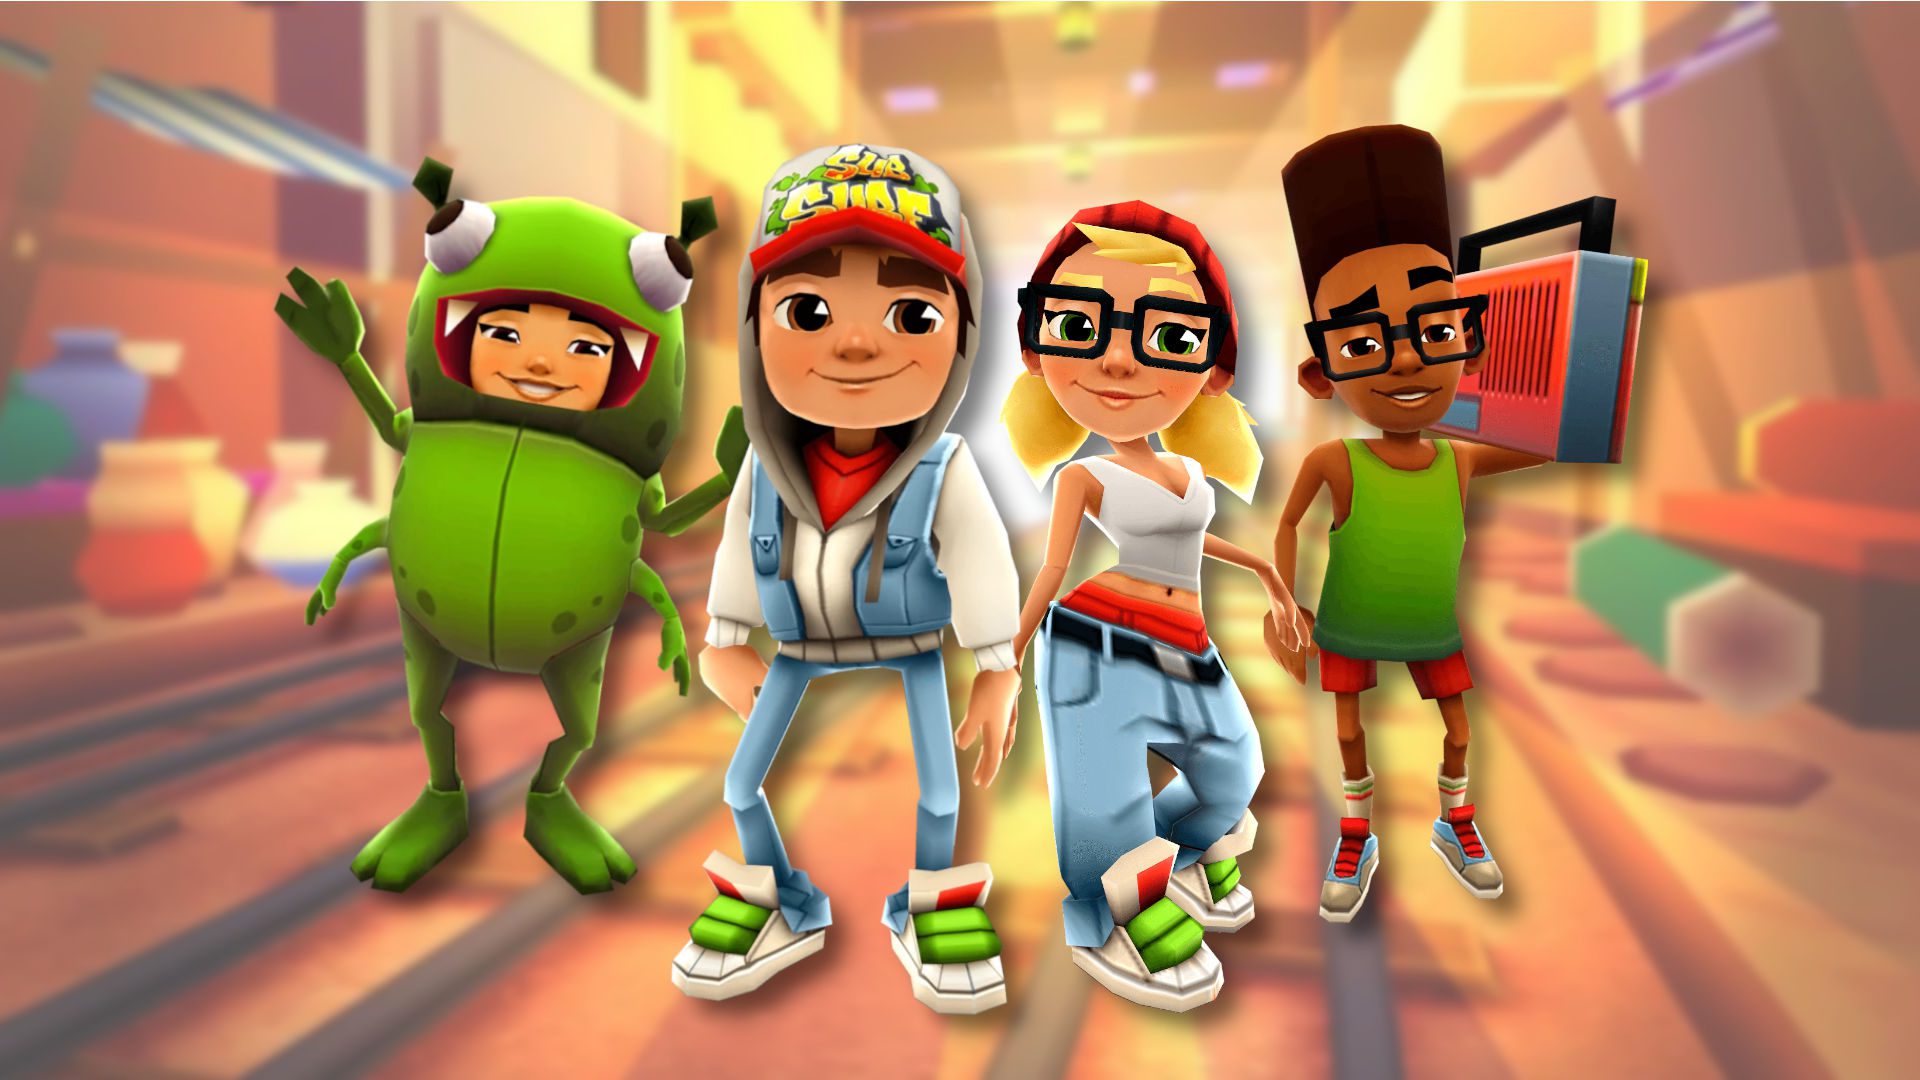 How To Subway Surfers Unblocked. Methods to Unblock Subway Surfers, by  movies motive